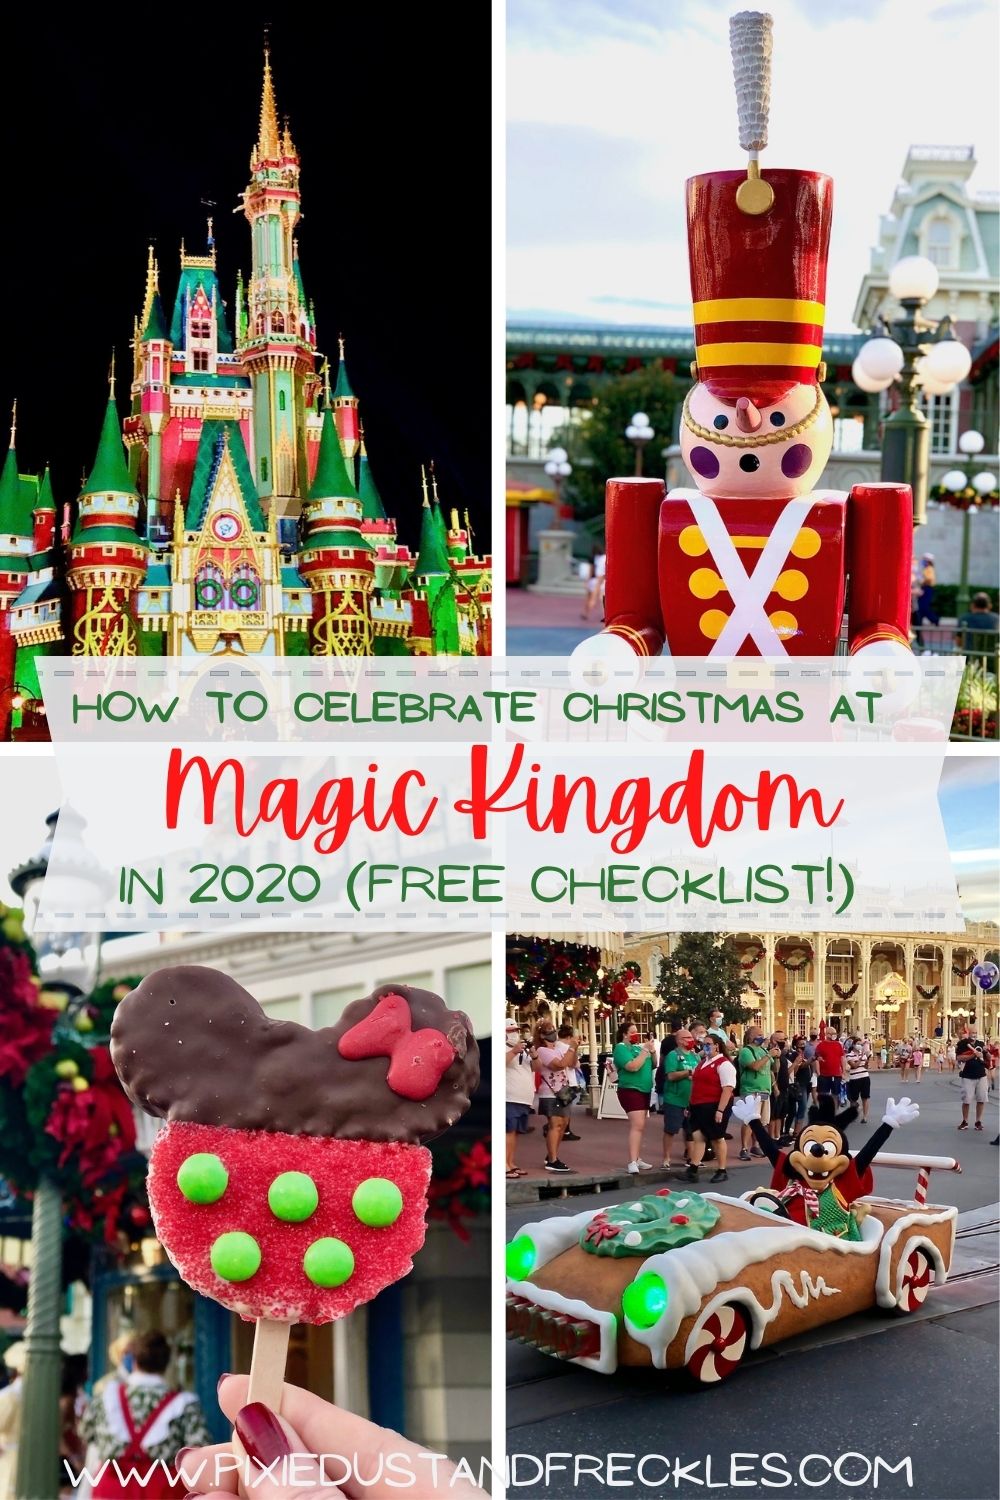 How to Celebrate Christmas at Magic Kingdom in 2020